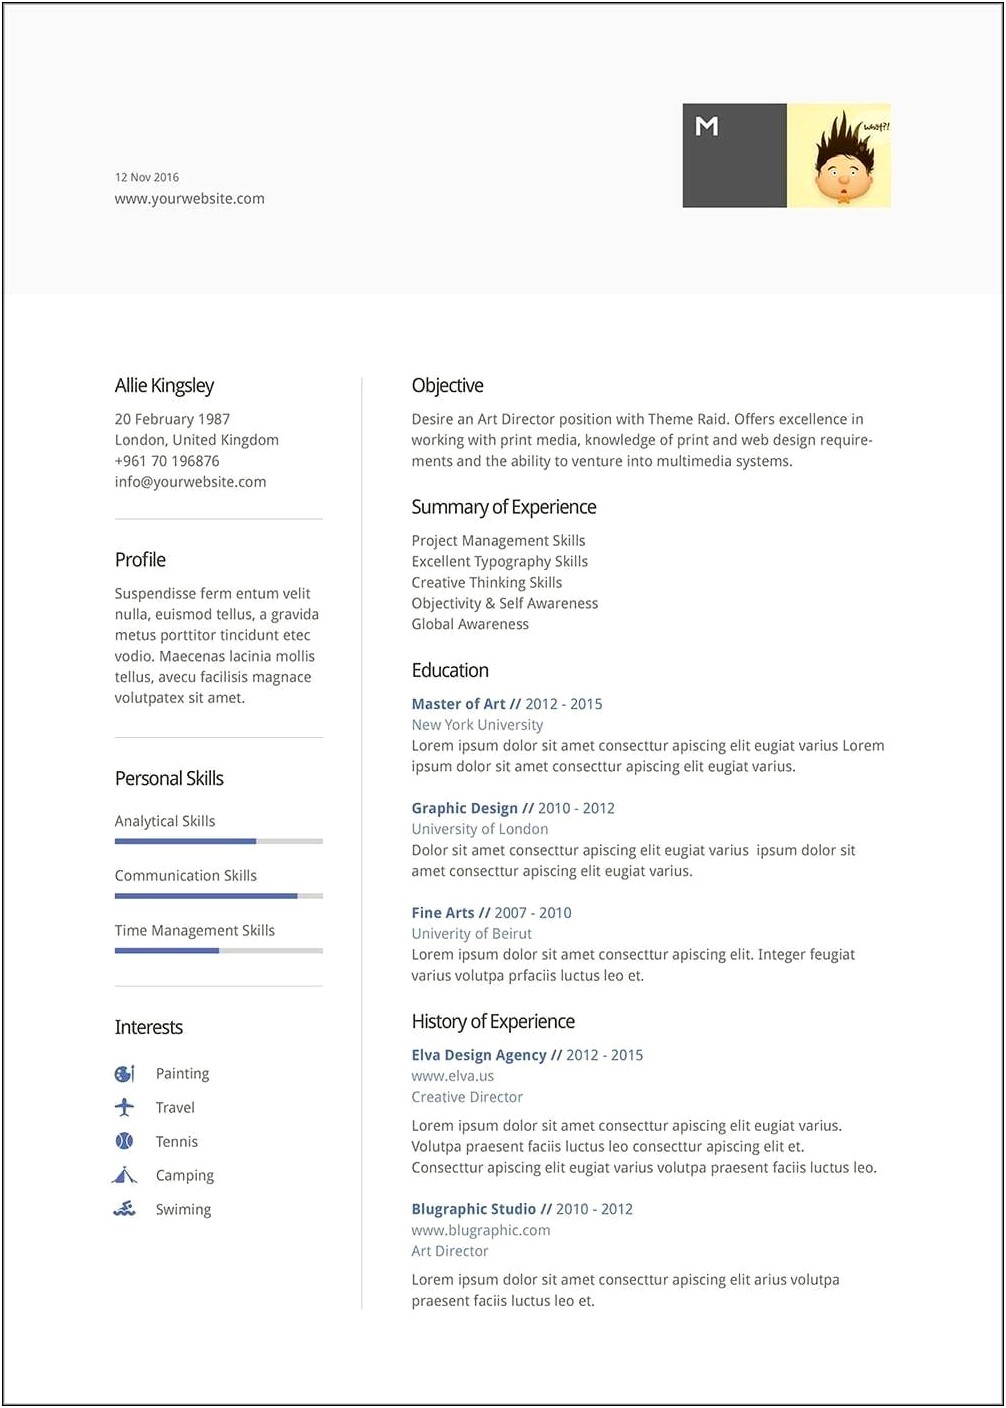 Microsoft Word Resume Template Not Downloading